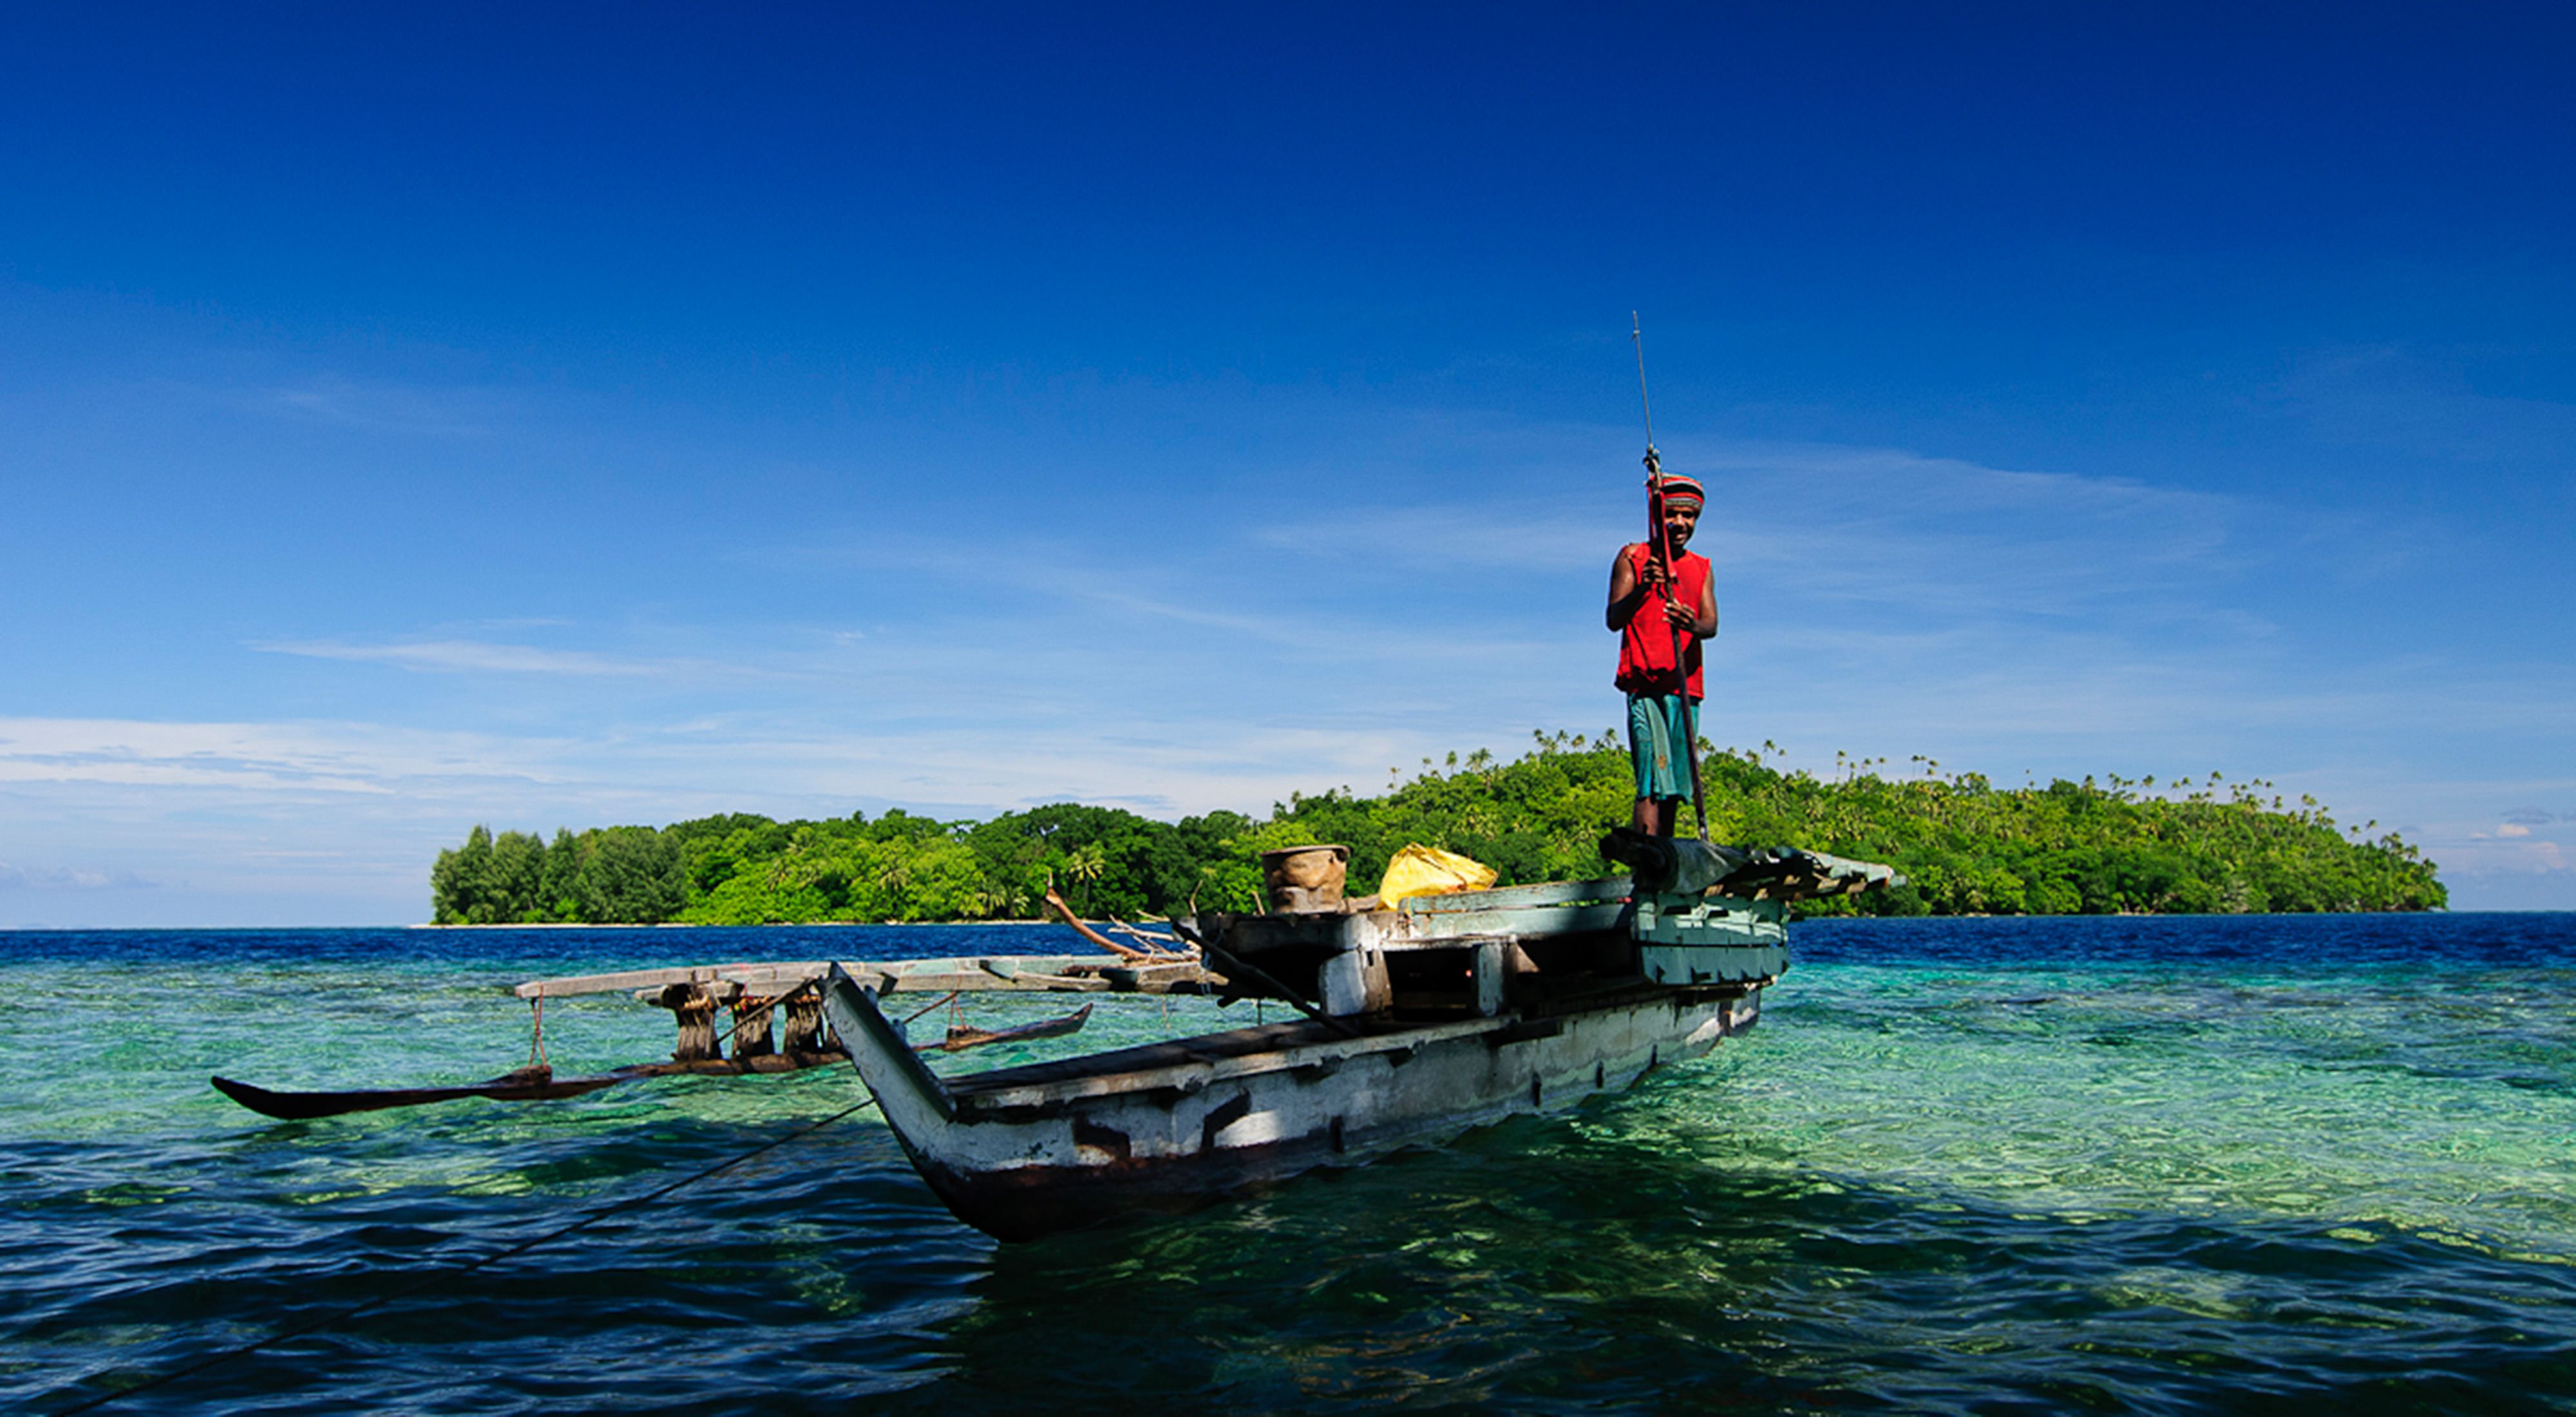 On this island in Papua New Guinea, tribal communities have embraced sustainable fisheries management.